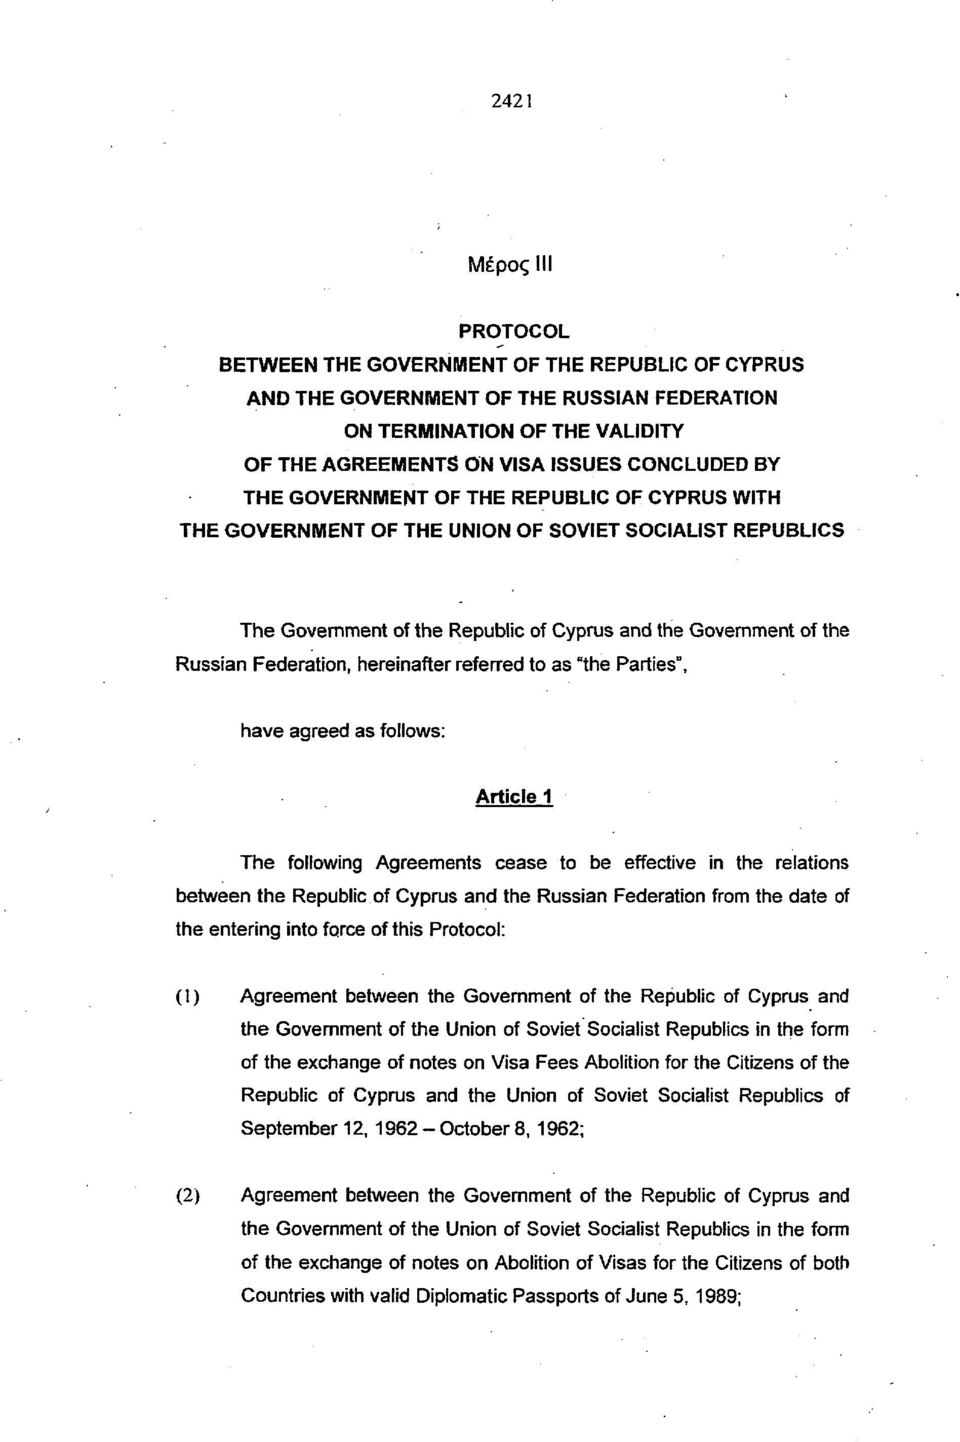 referred to as "the Parties", have agreed as follows: Article 1 The following Agreements cease to be effective in the relations between the Republic of Cyprus and the Russian Federation from the date